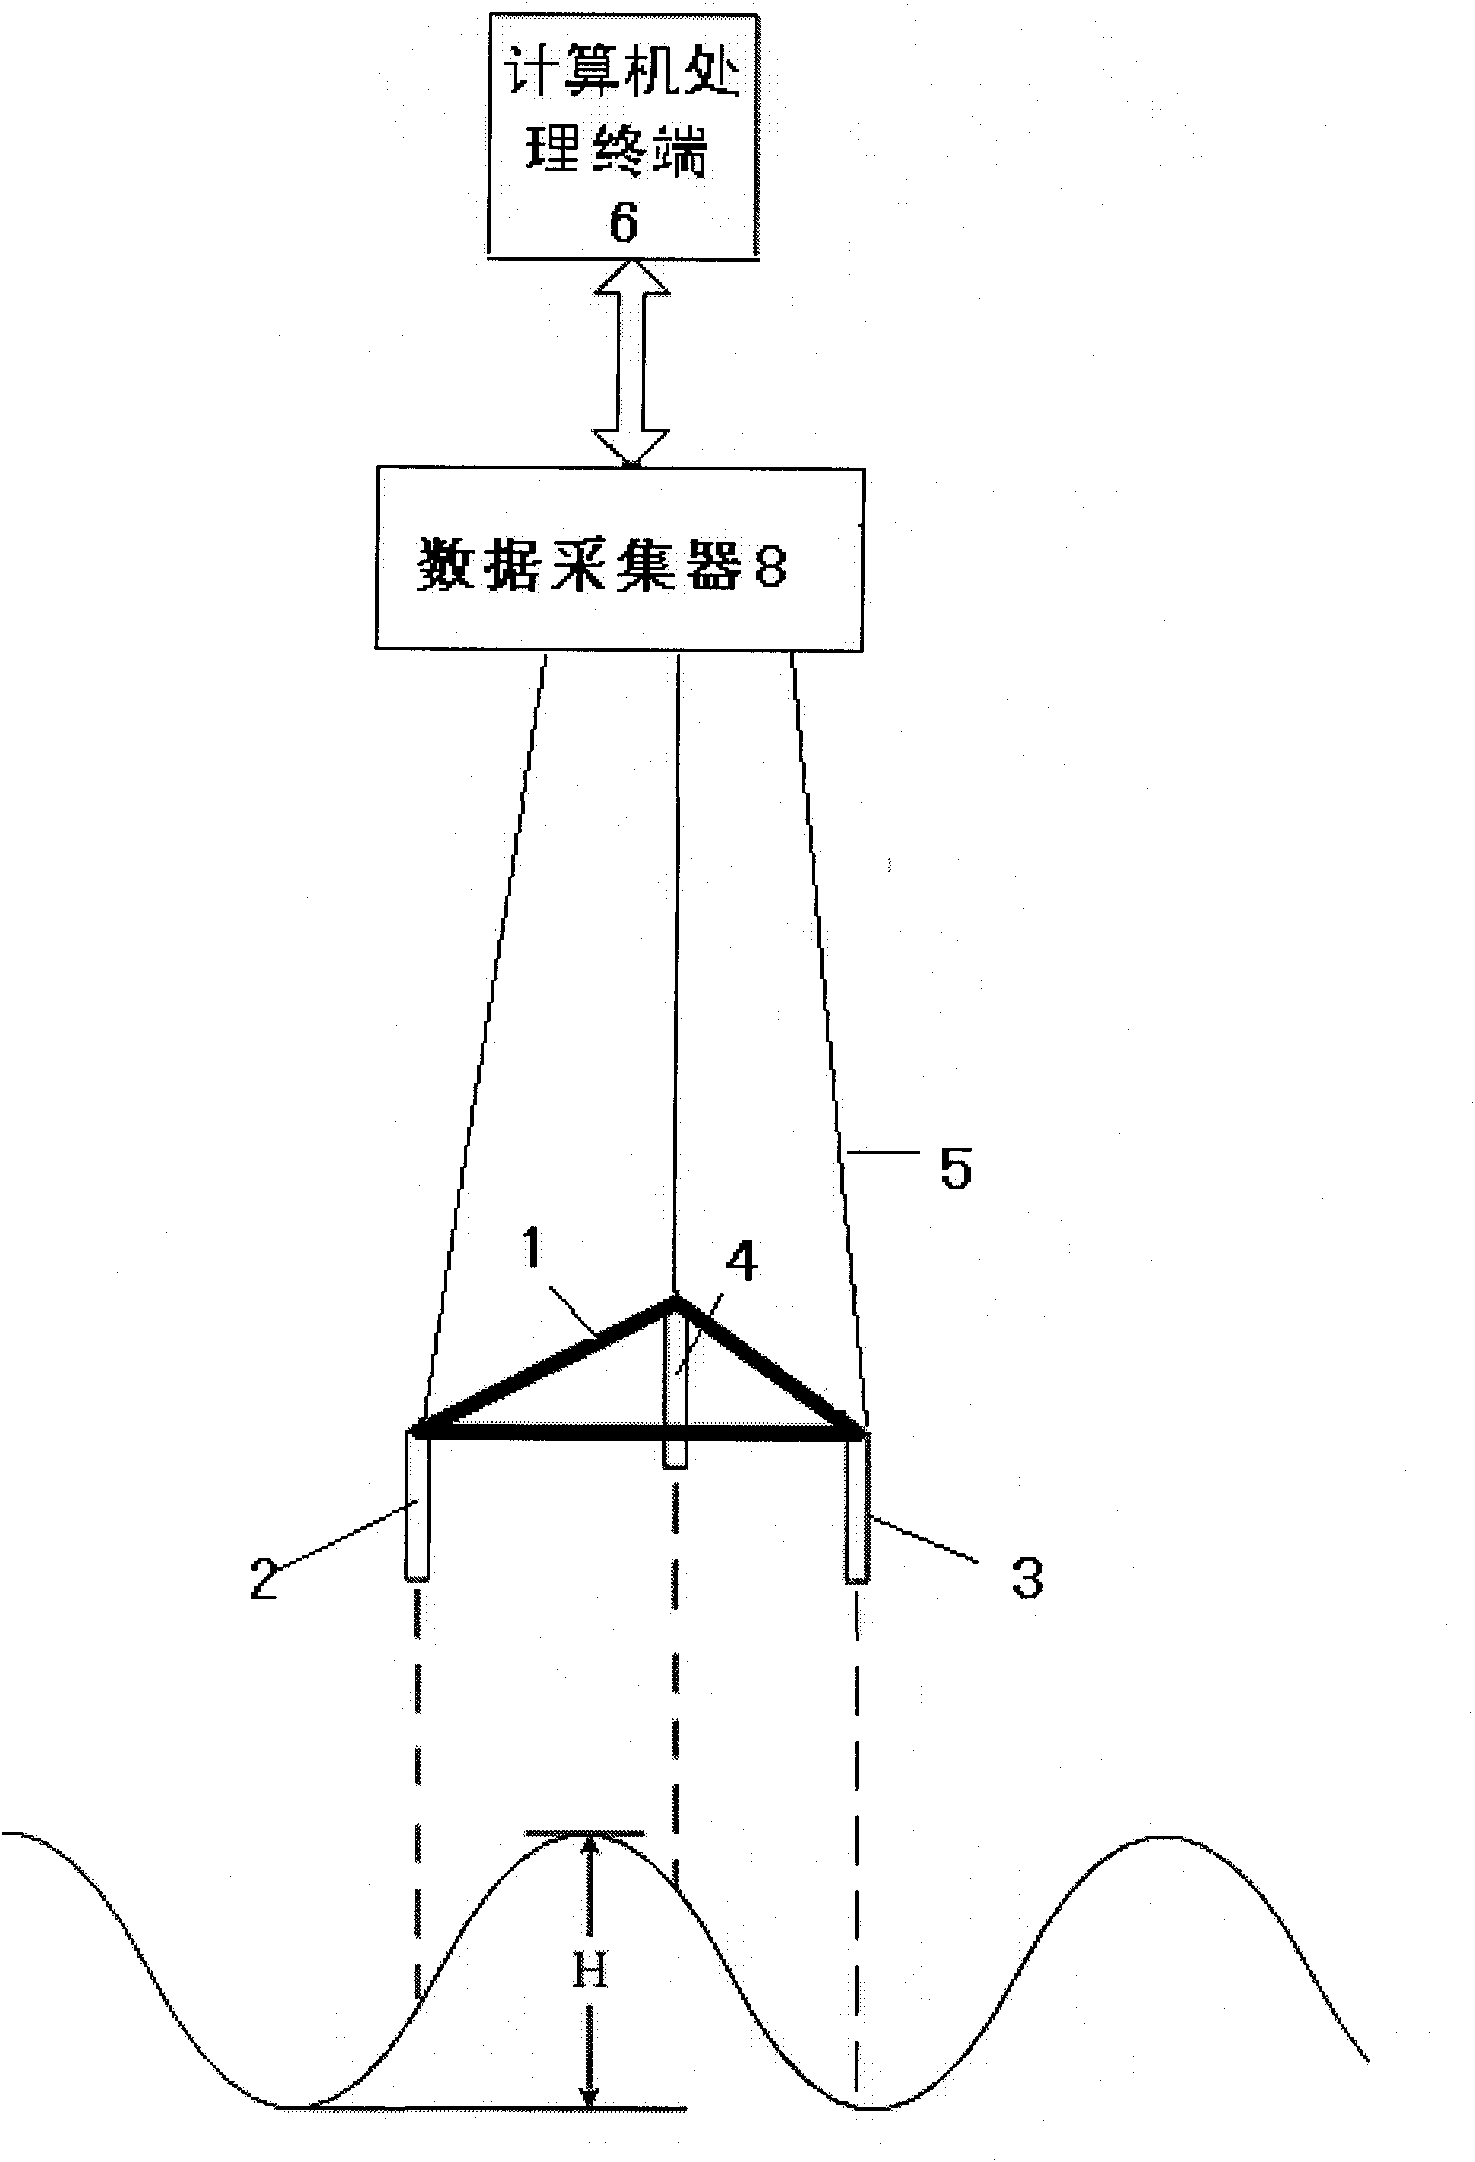 Array type wave monitoring device and wave measurement method thereof